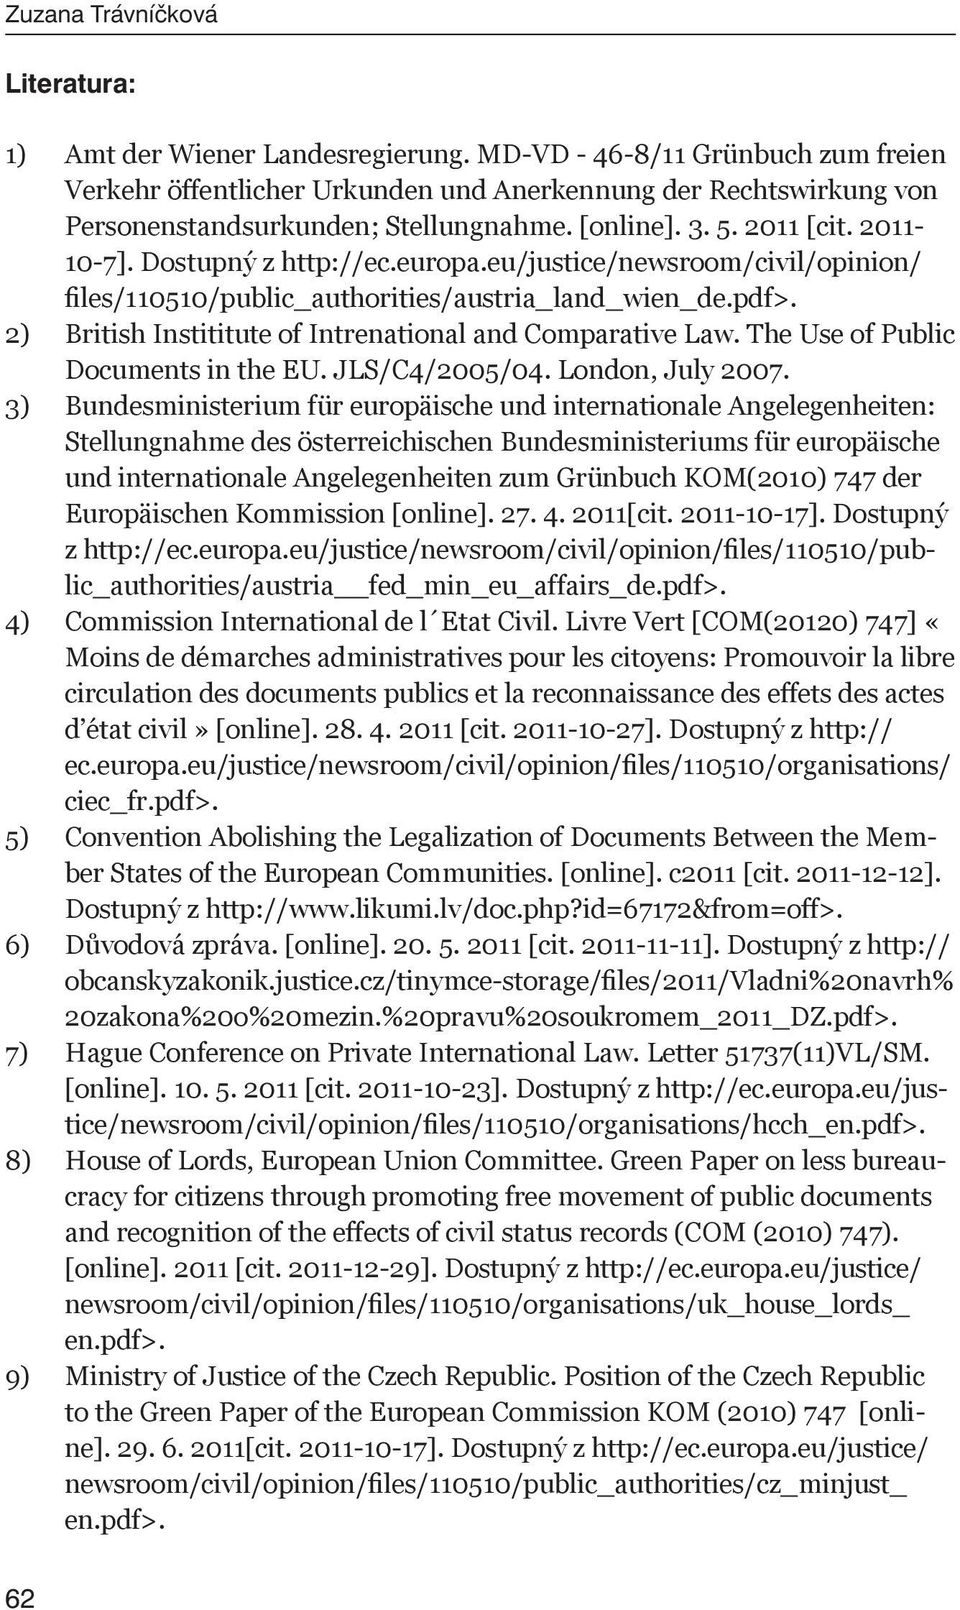 2) British Instititute of Intrenational and Comparative Law. The Use of Public Documents in the EU. JLS/C4/2005/04. London, July 2007.